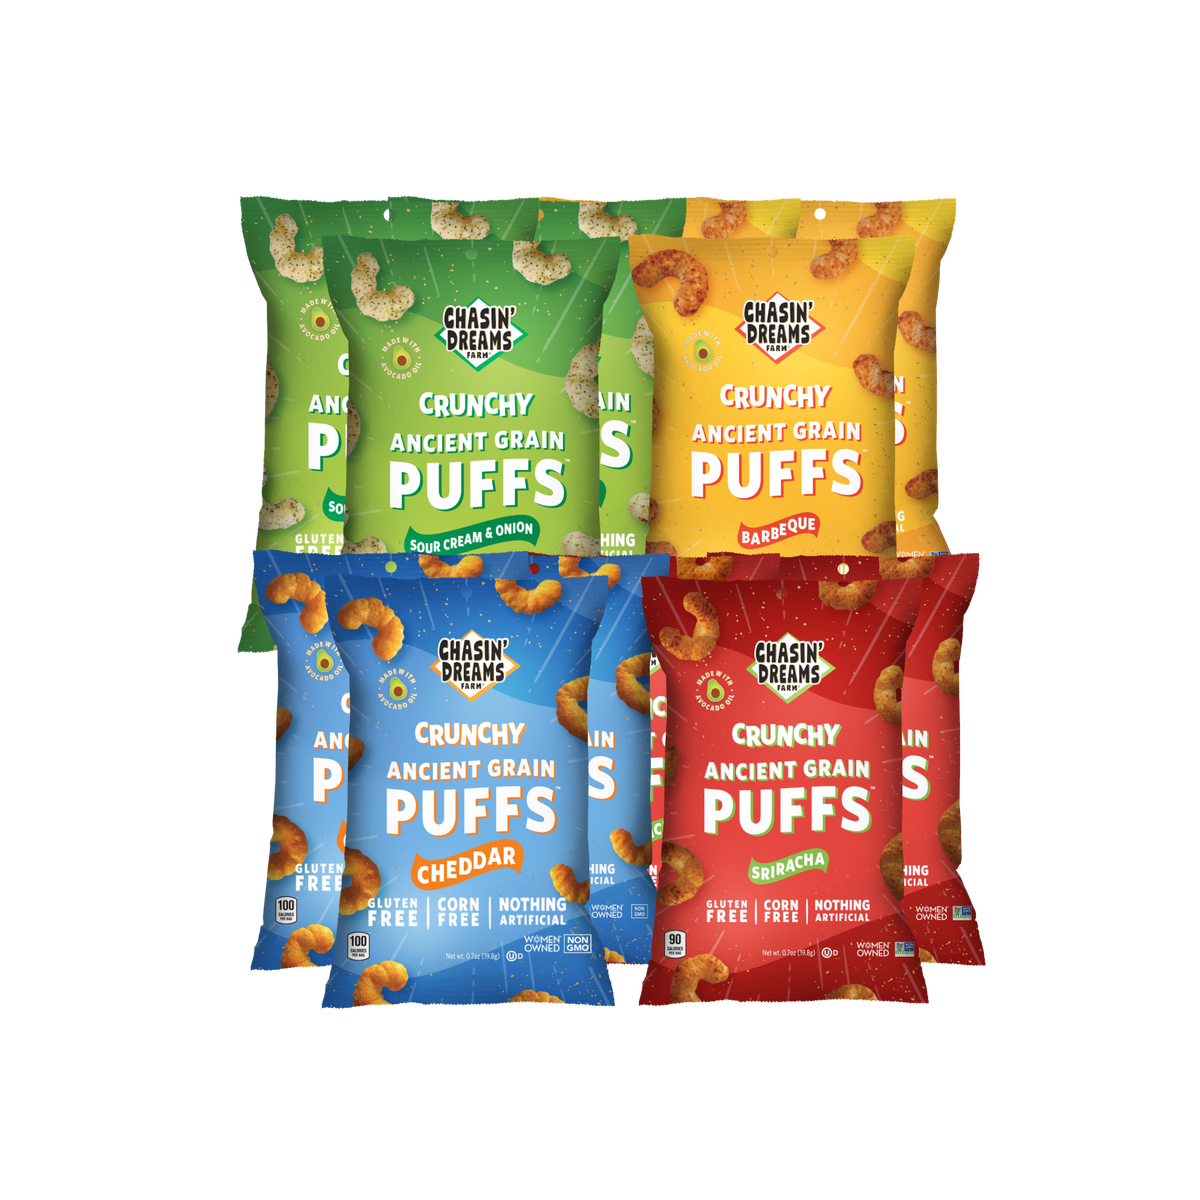 Three yellow bags of Barbeque Puffs 0.7oz, three red bags of Sriracha Puffs 0.7oz, three blue bags of Cheddar Puffs 0.7oz and three green bags of Sour Cream &amp; Onion 0.7oz puffs.